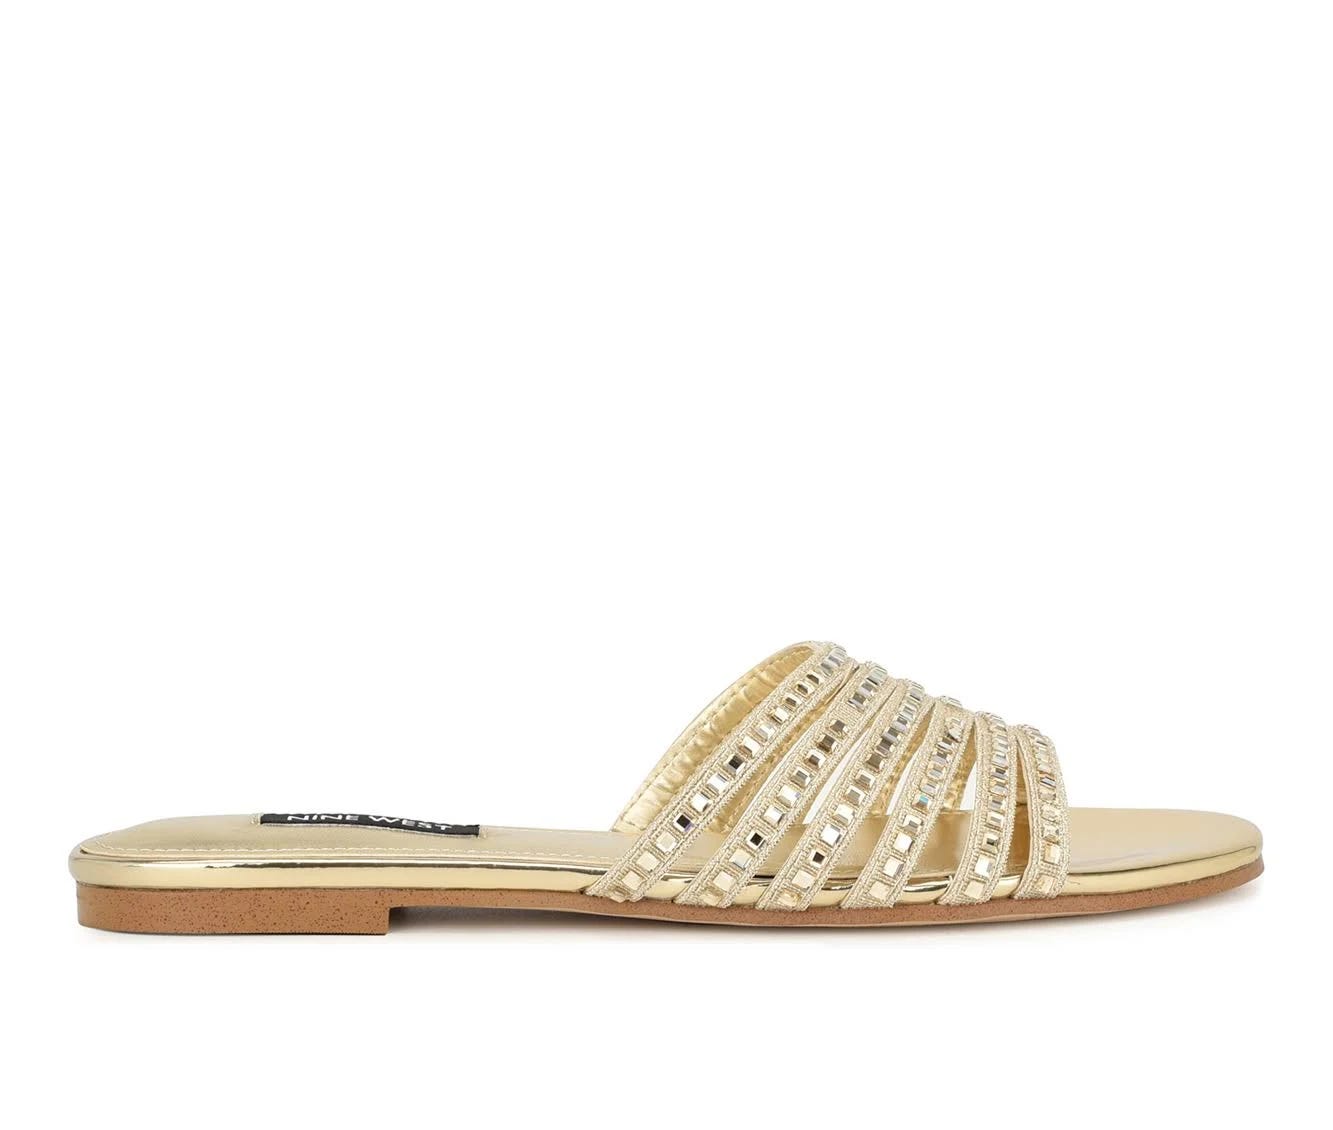 Gold Metallic Lacee Flat Sandals by Nine West | Image